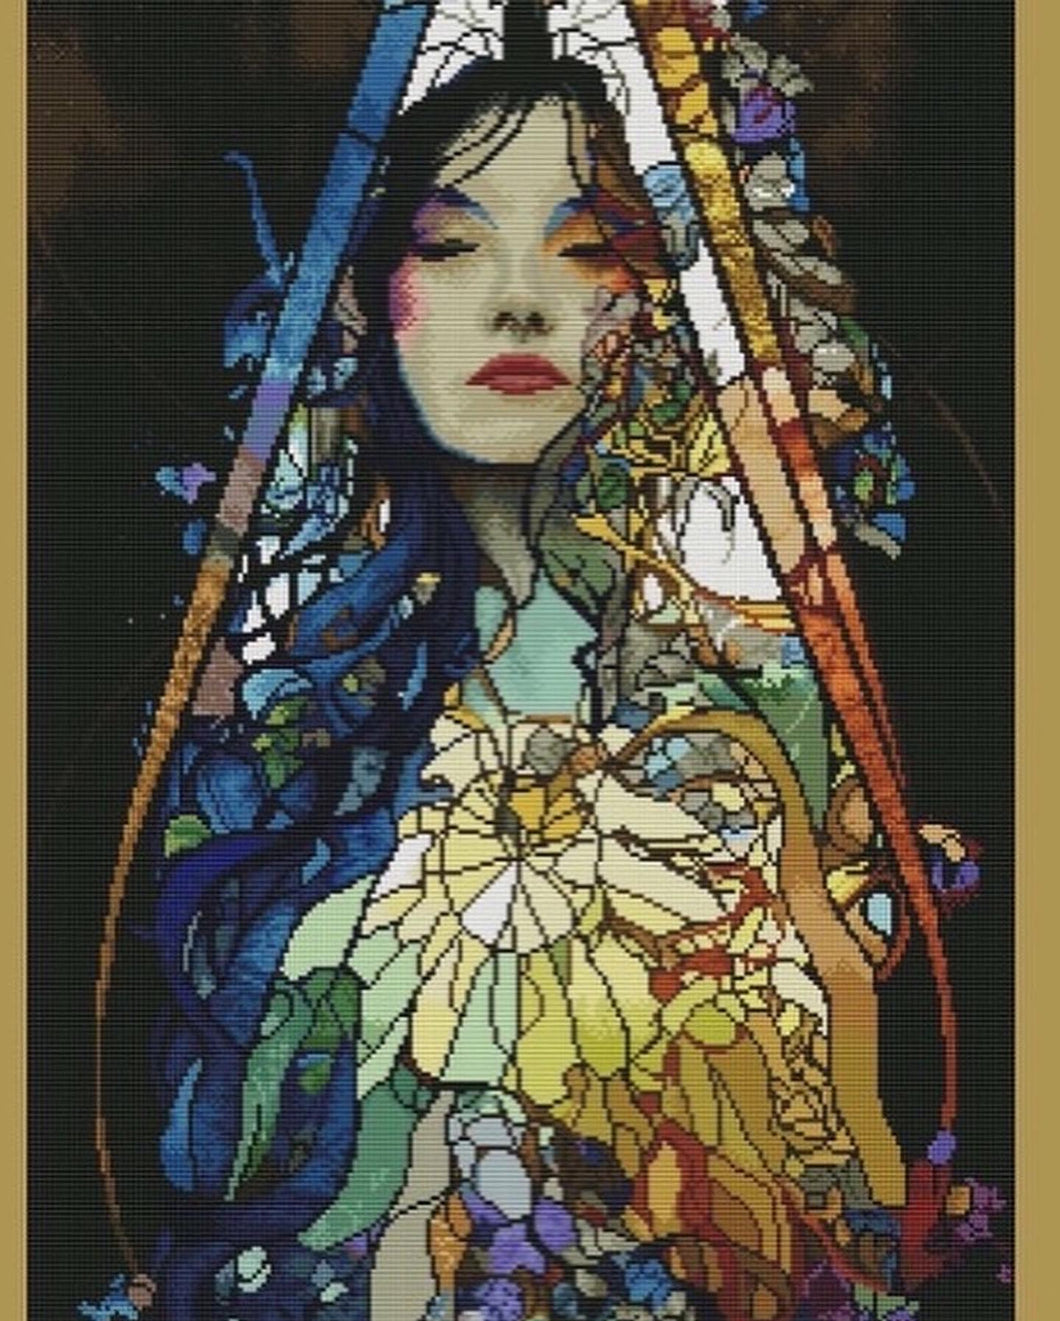 Lady of Stained Glass #2 by CJ